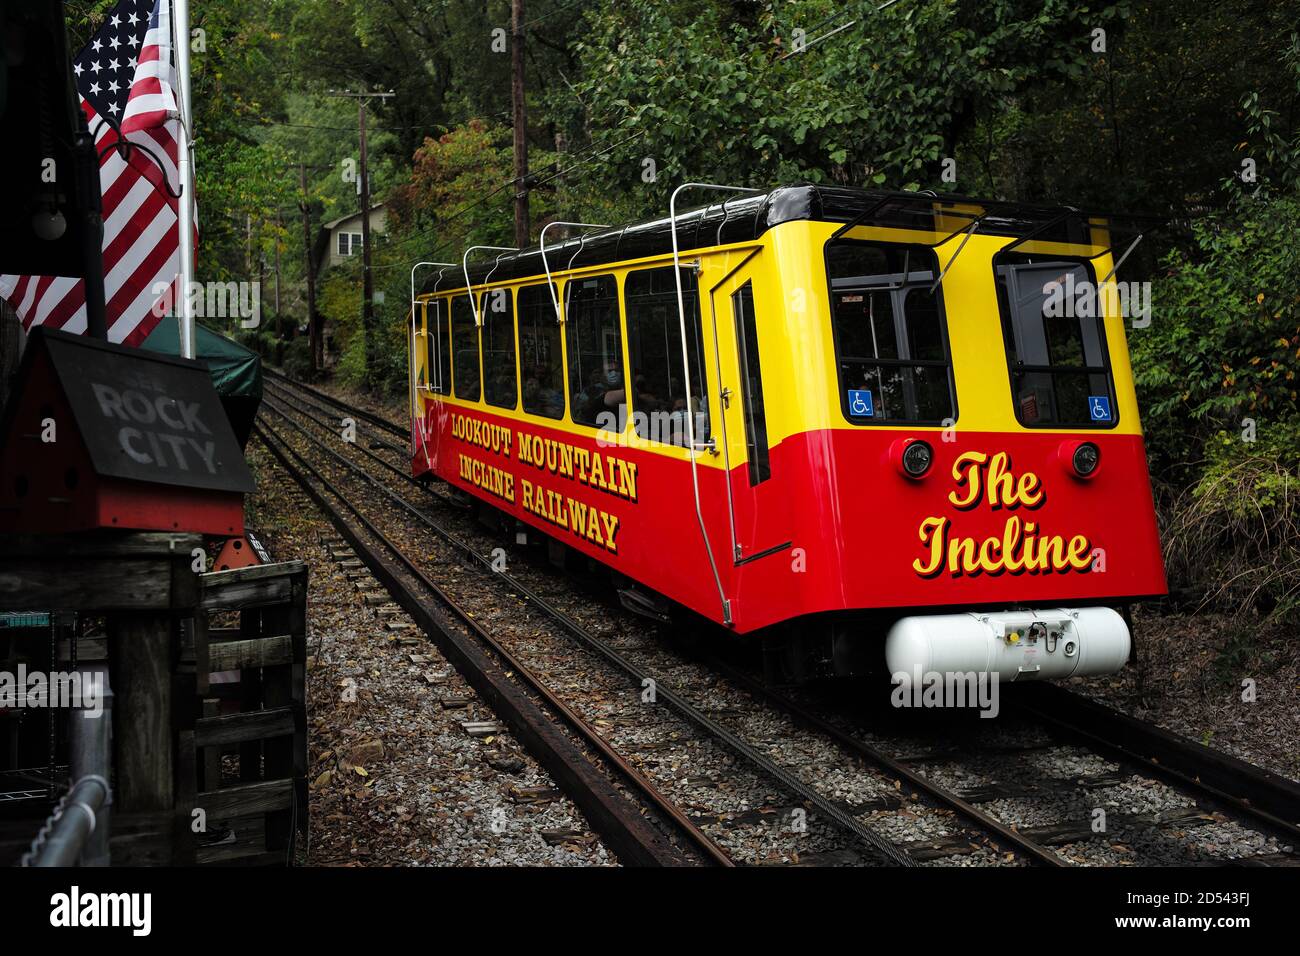 The inclined plane funicular railway, known as the Incline, seen climbing Lookout Mountain, TN Stock Photo